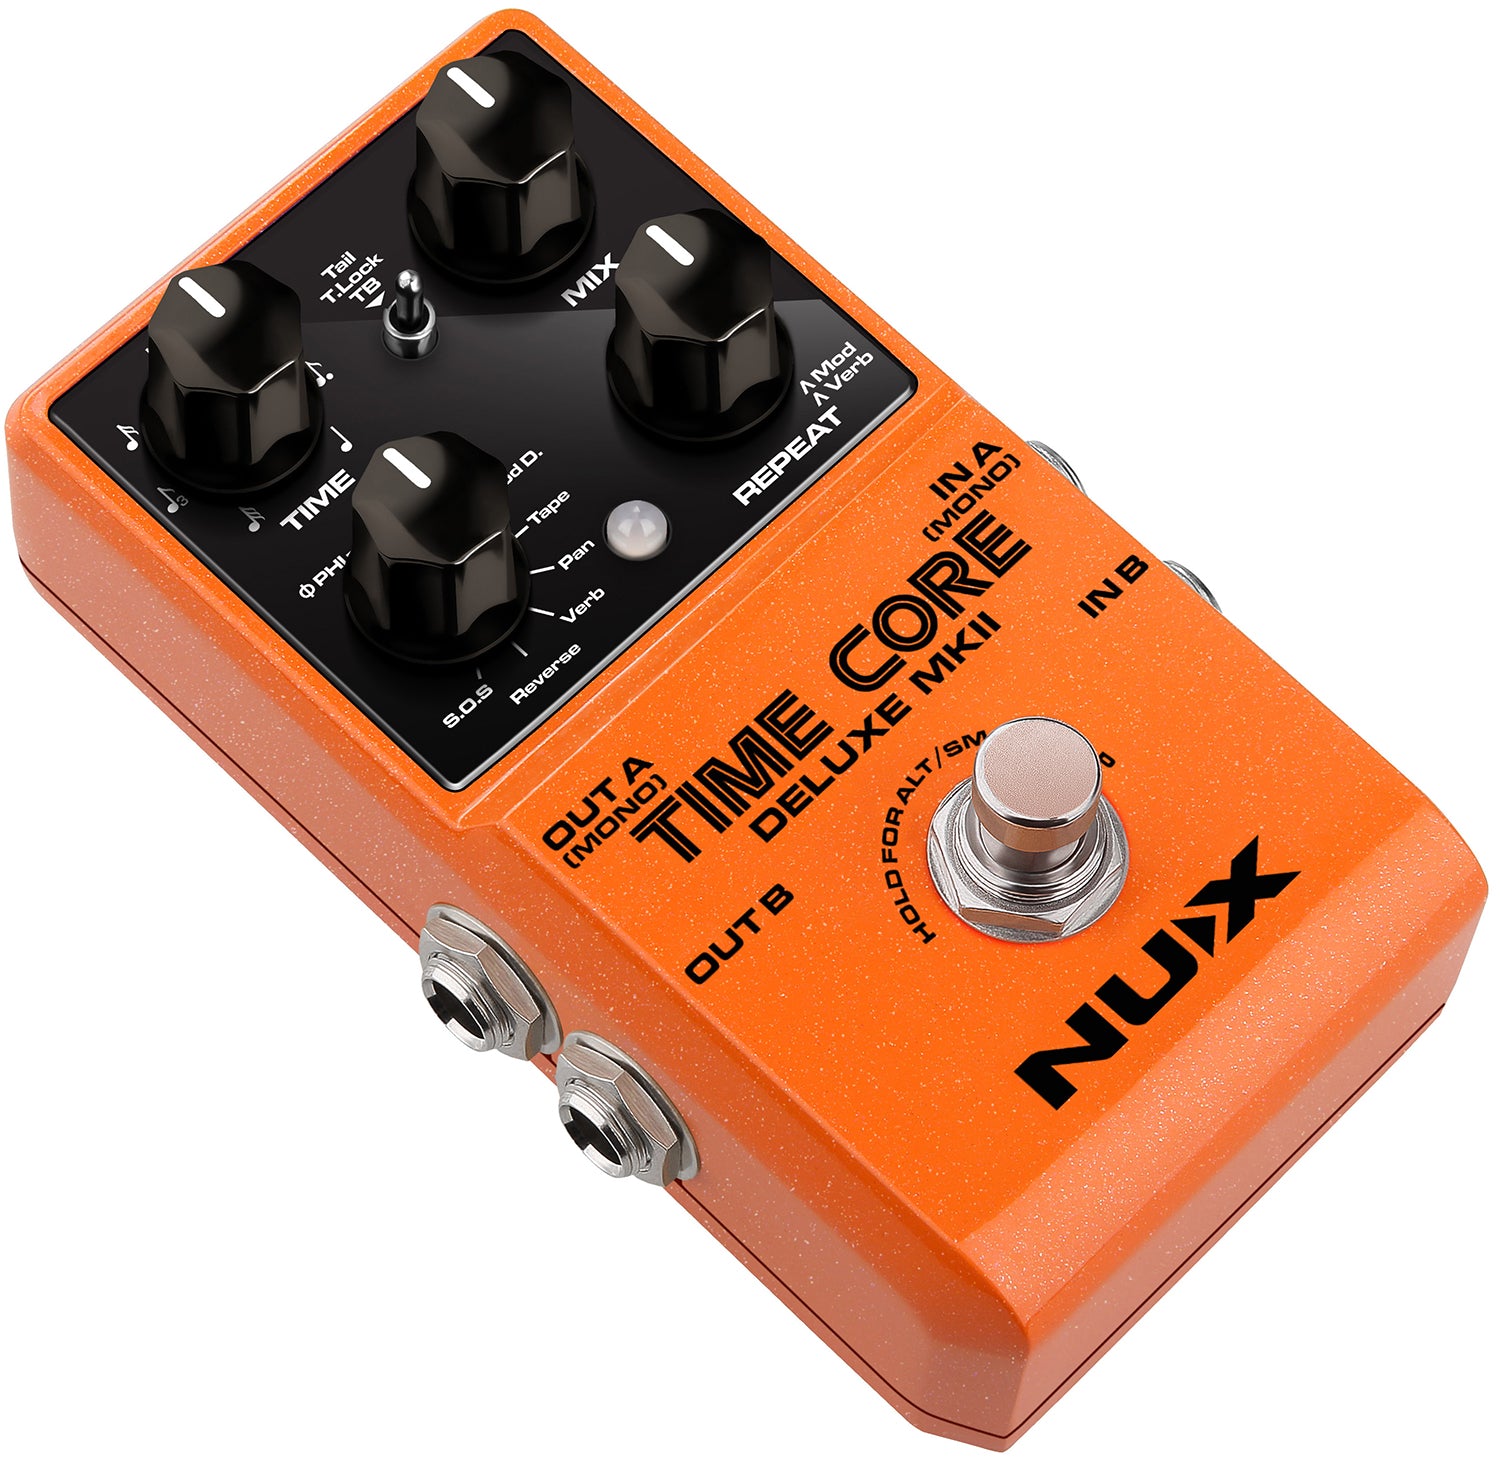 NU-X Time Core Deluxe MKII Digital Delay Pedal